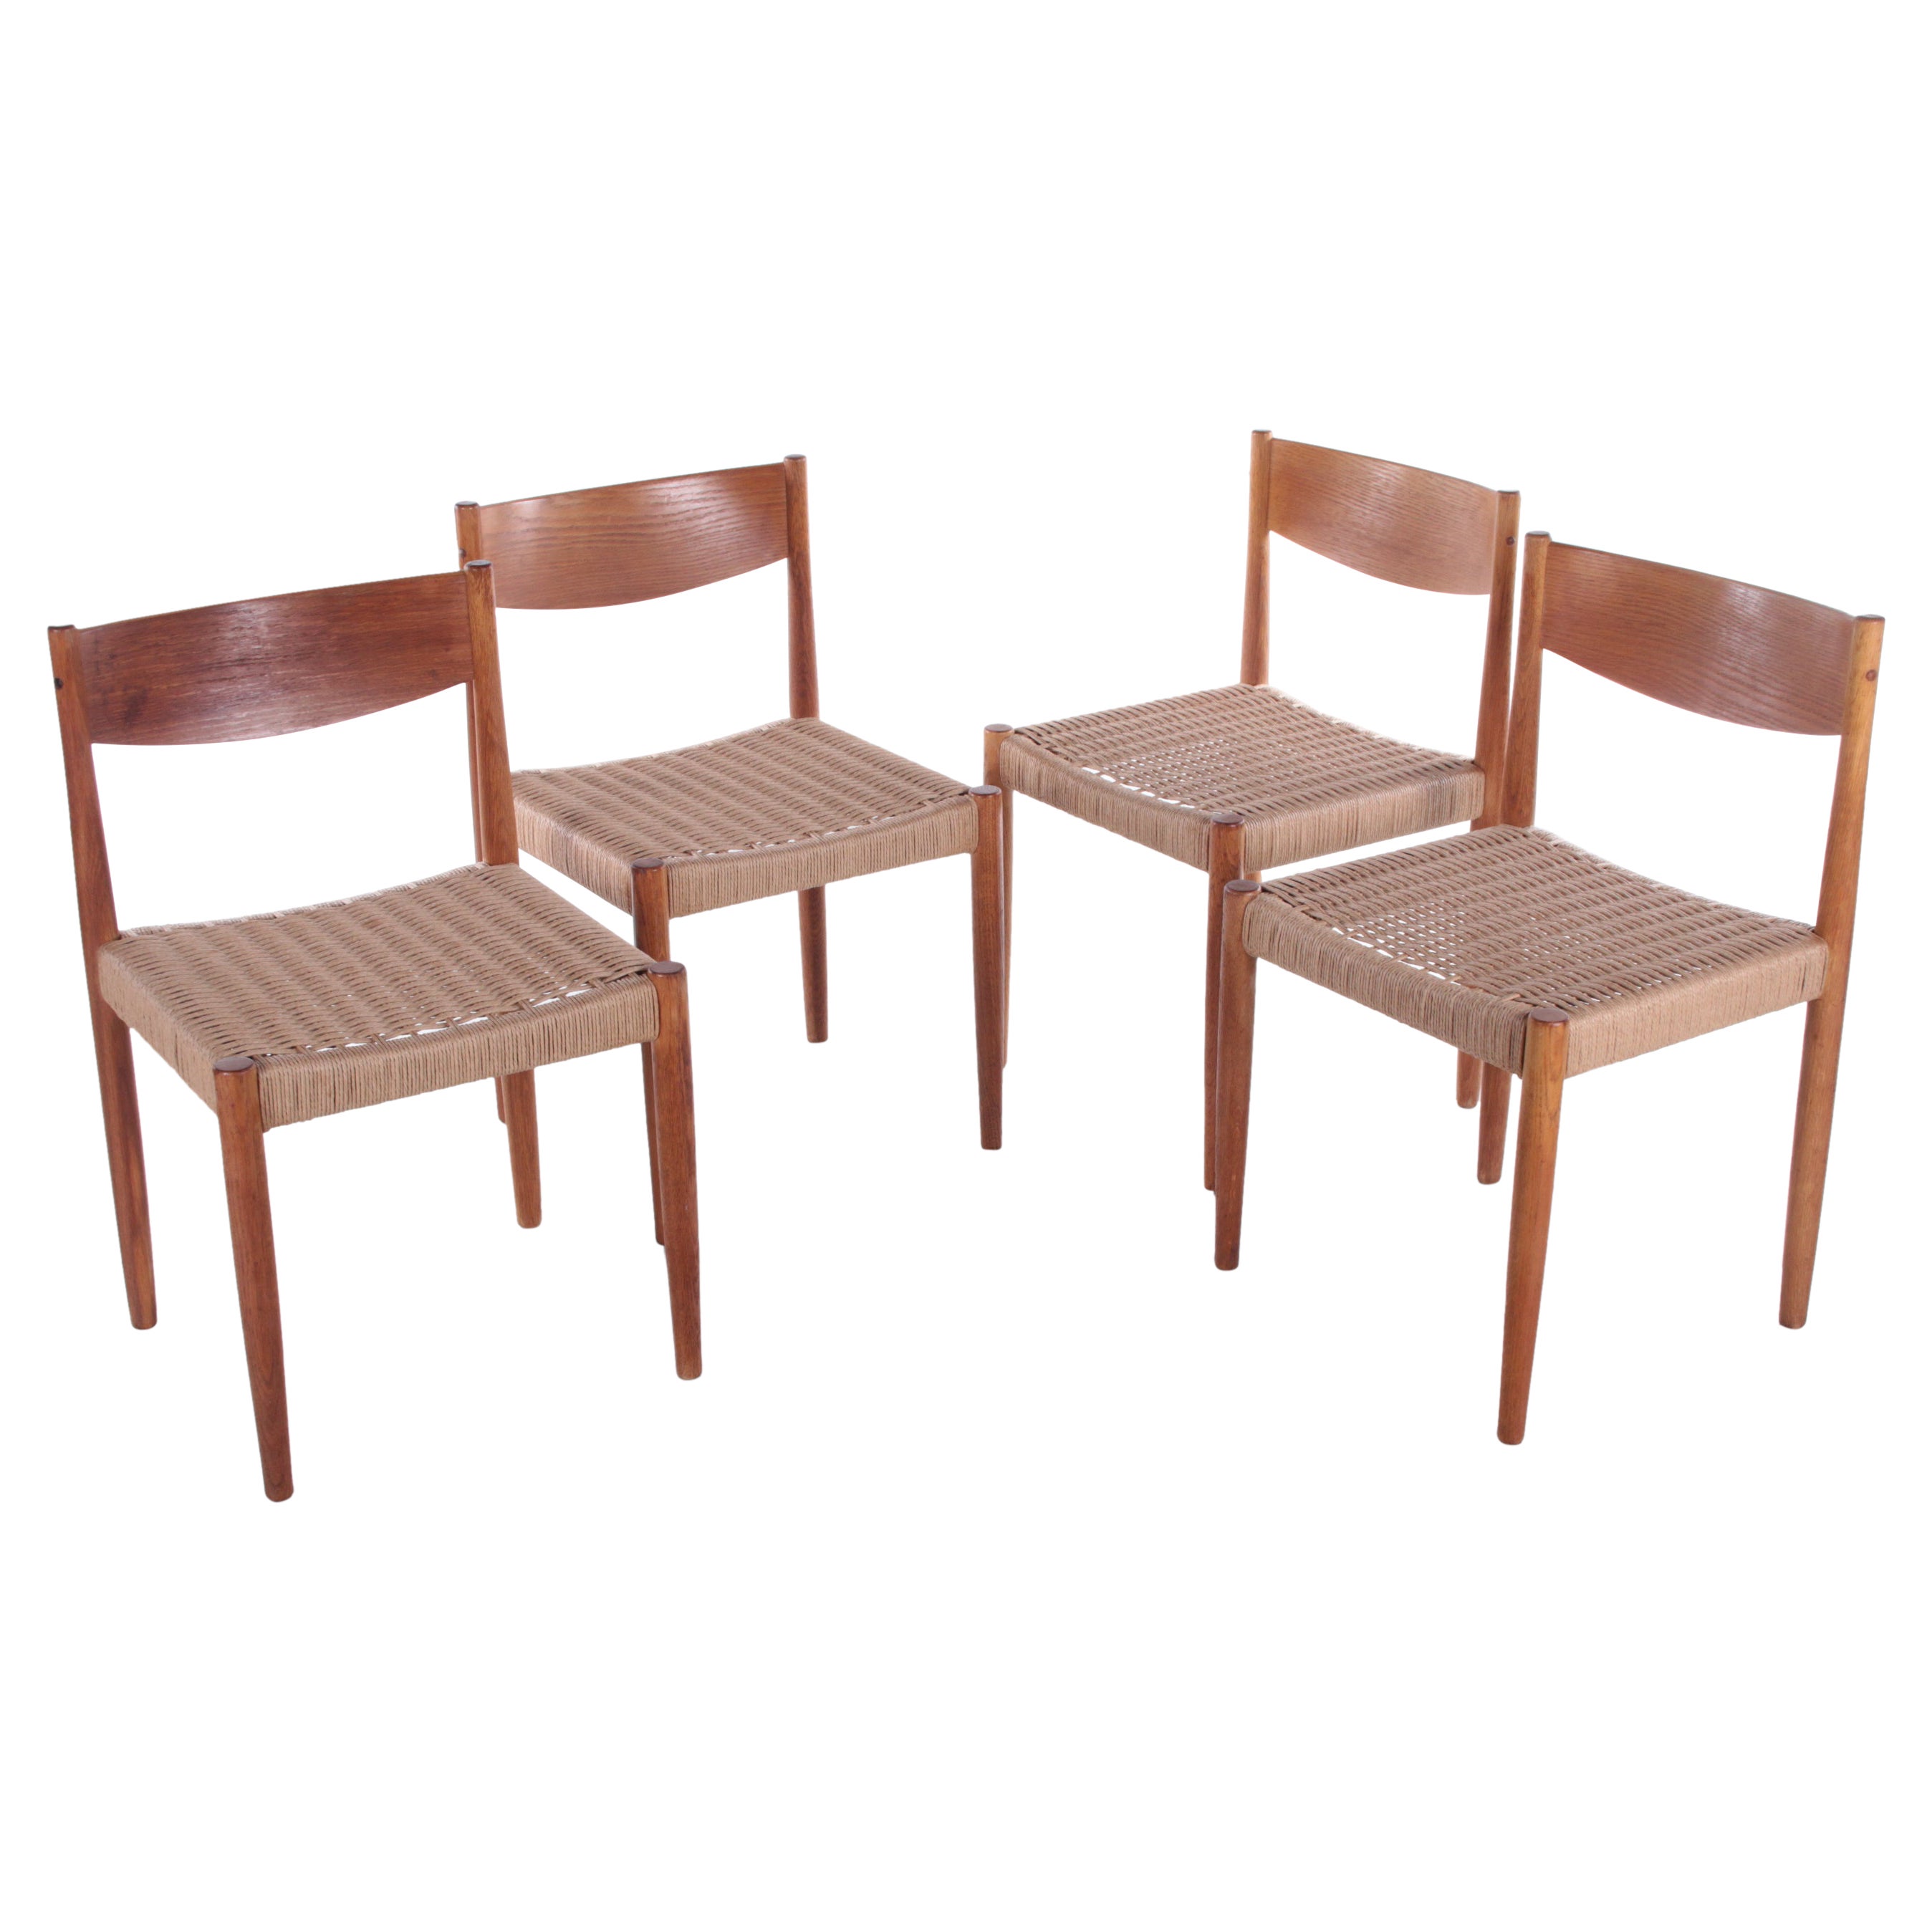 Set of 4 Dining Room Chairs by Poul Volther for Frem Røjle, 1960s